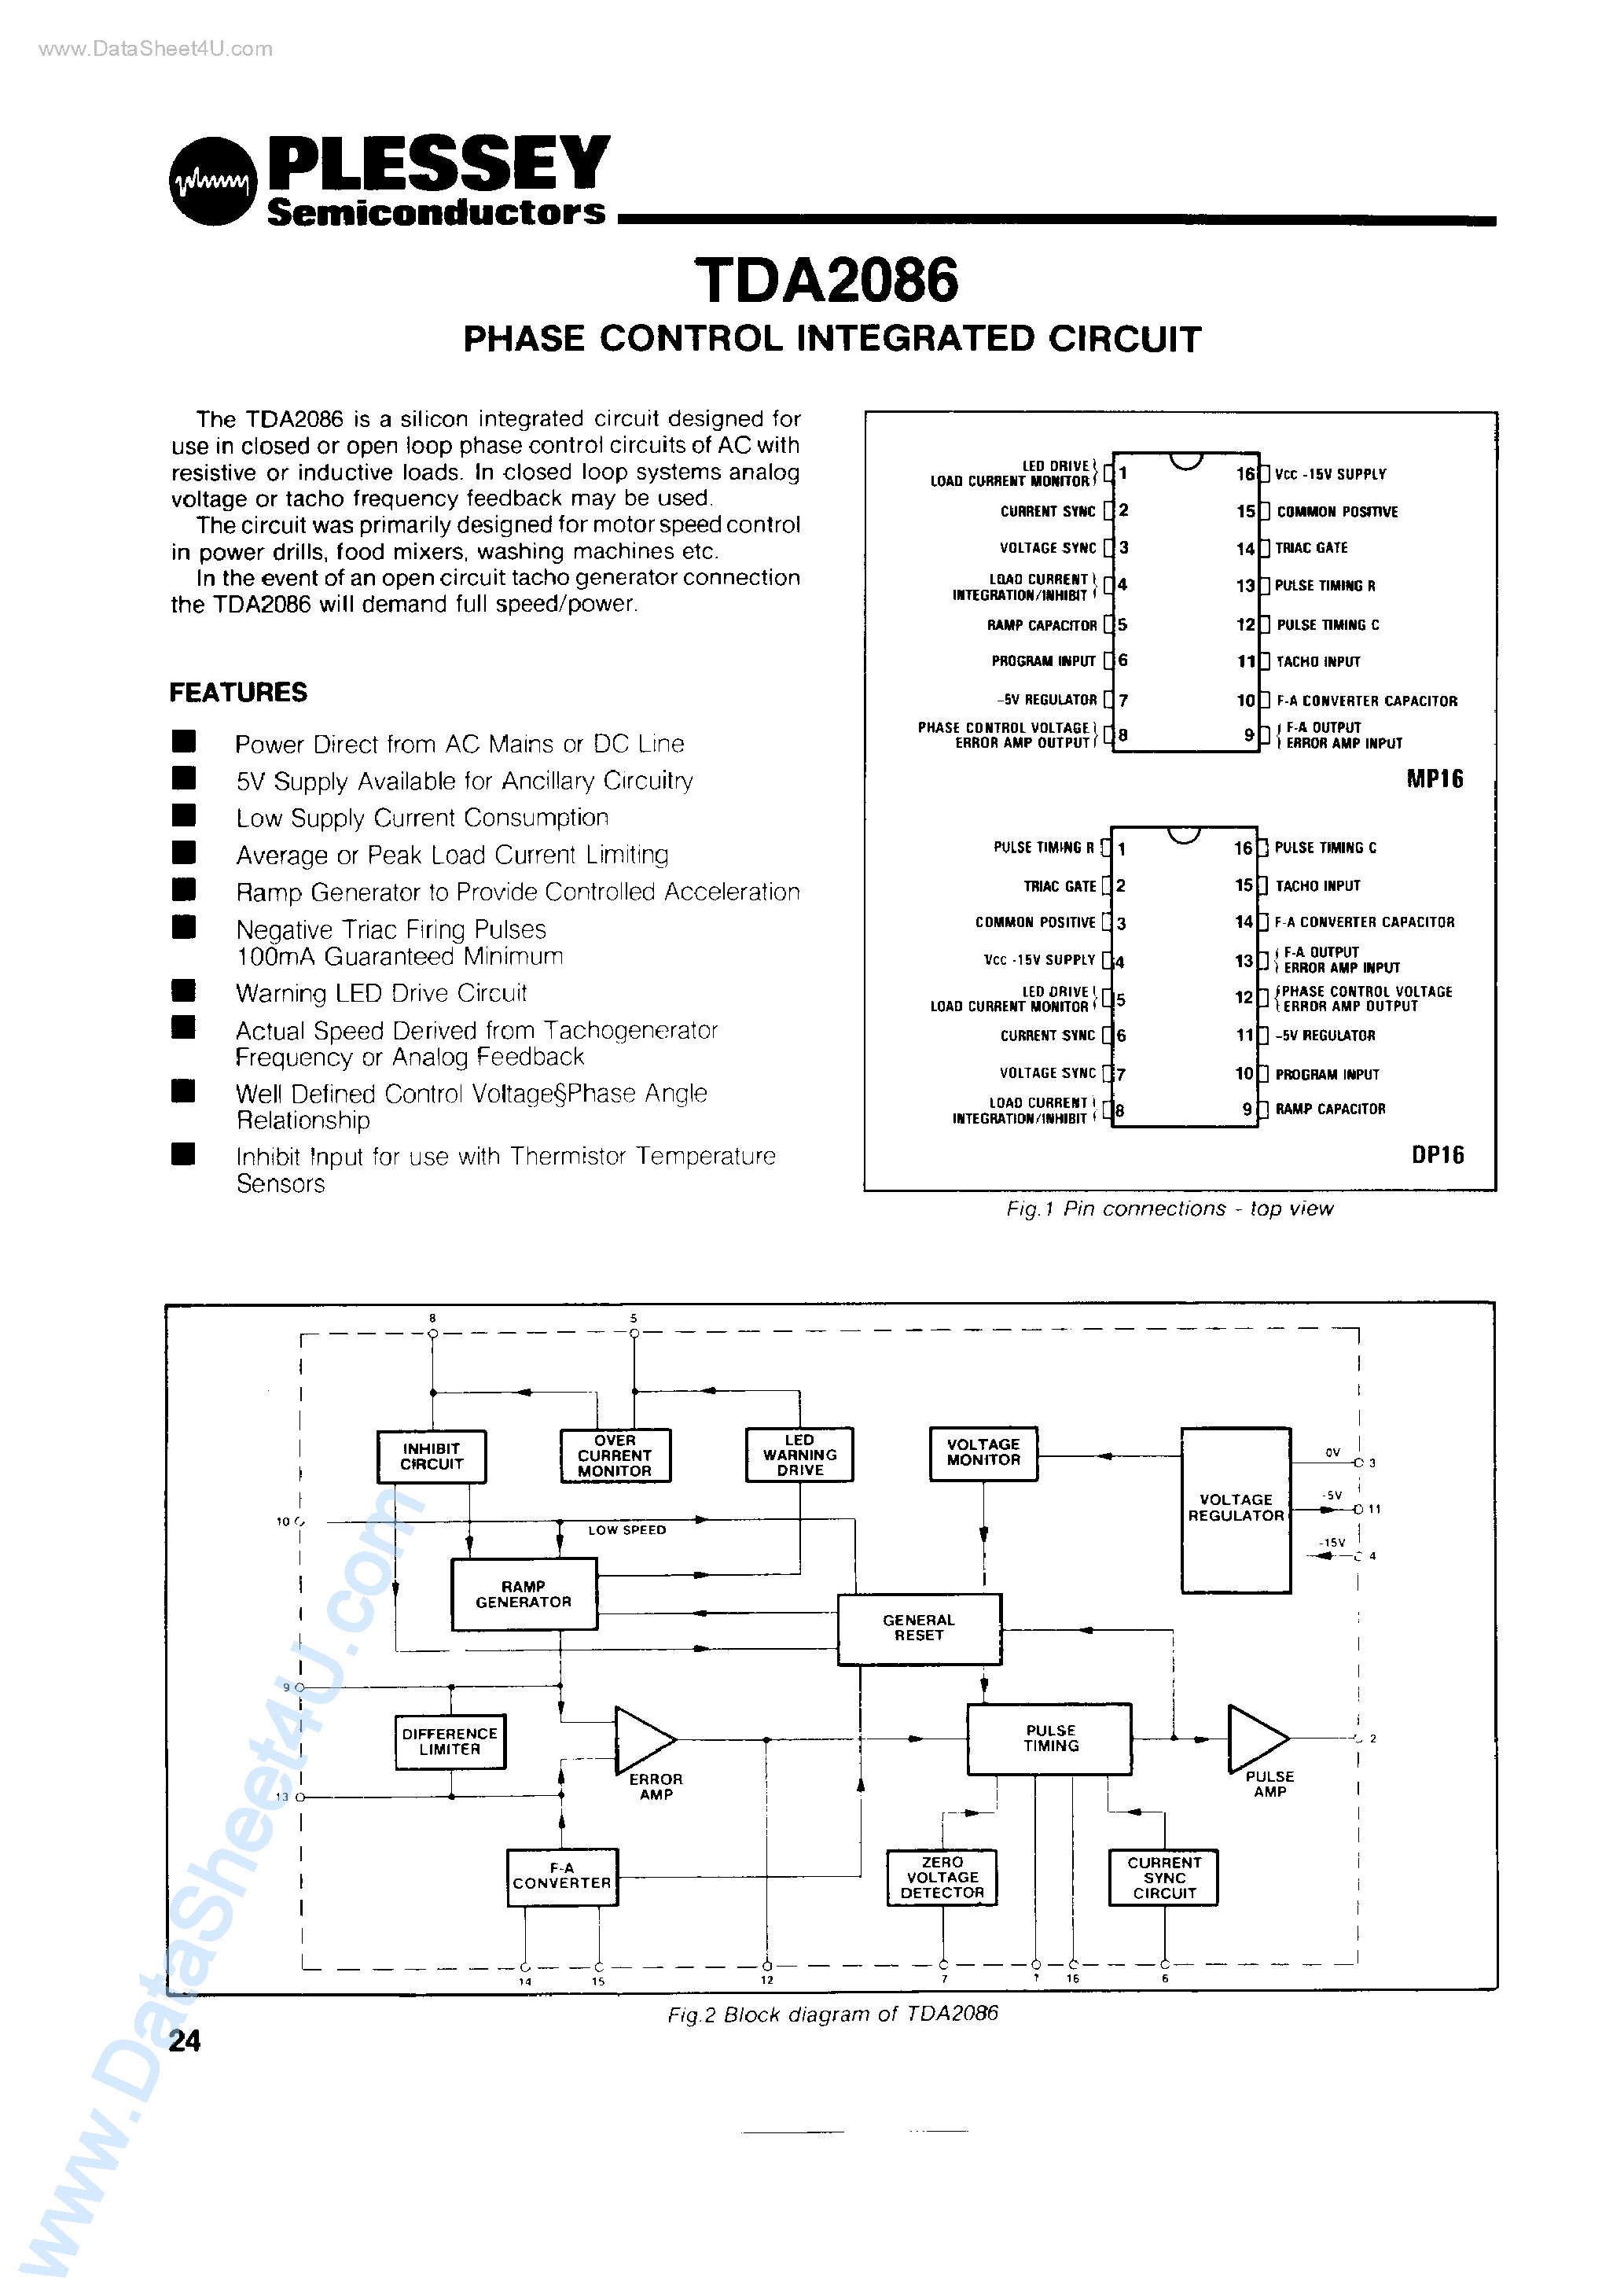 Datasheet TDA-2086 - Phase Control Integrated Circuit page 1